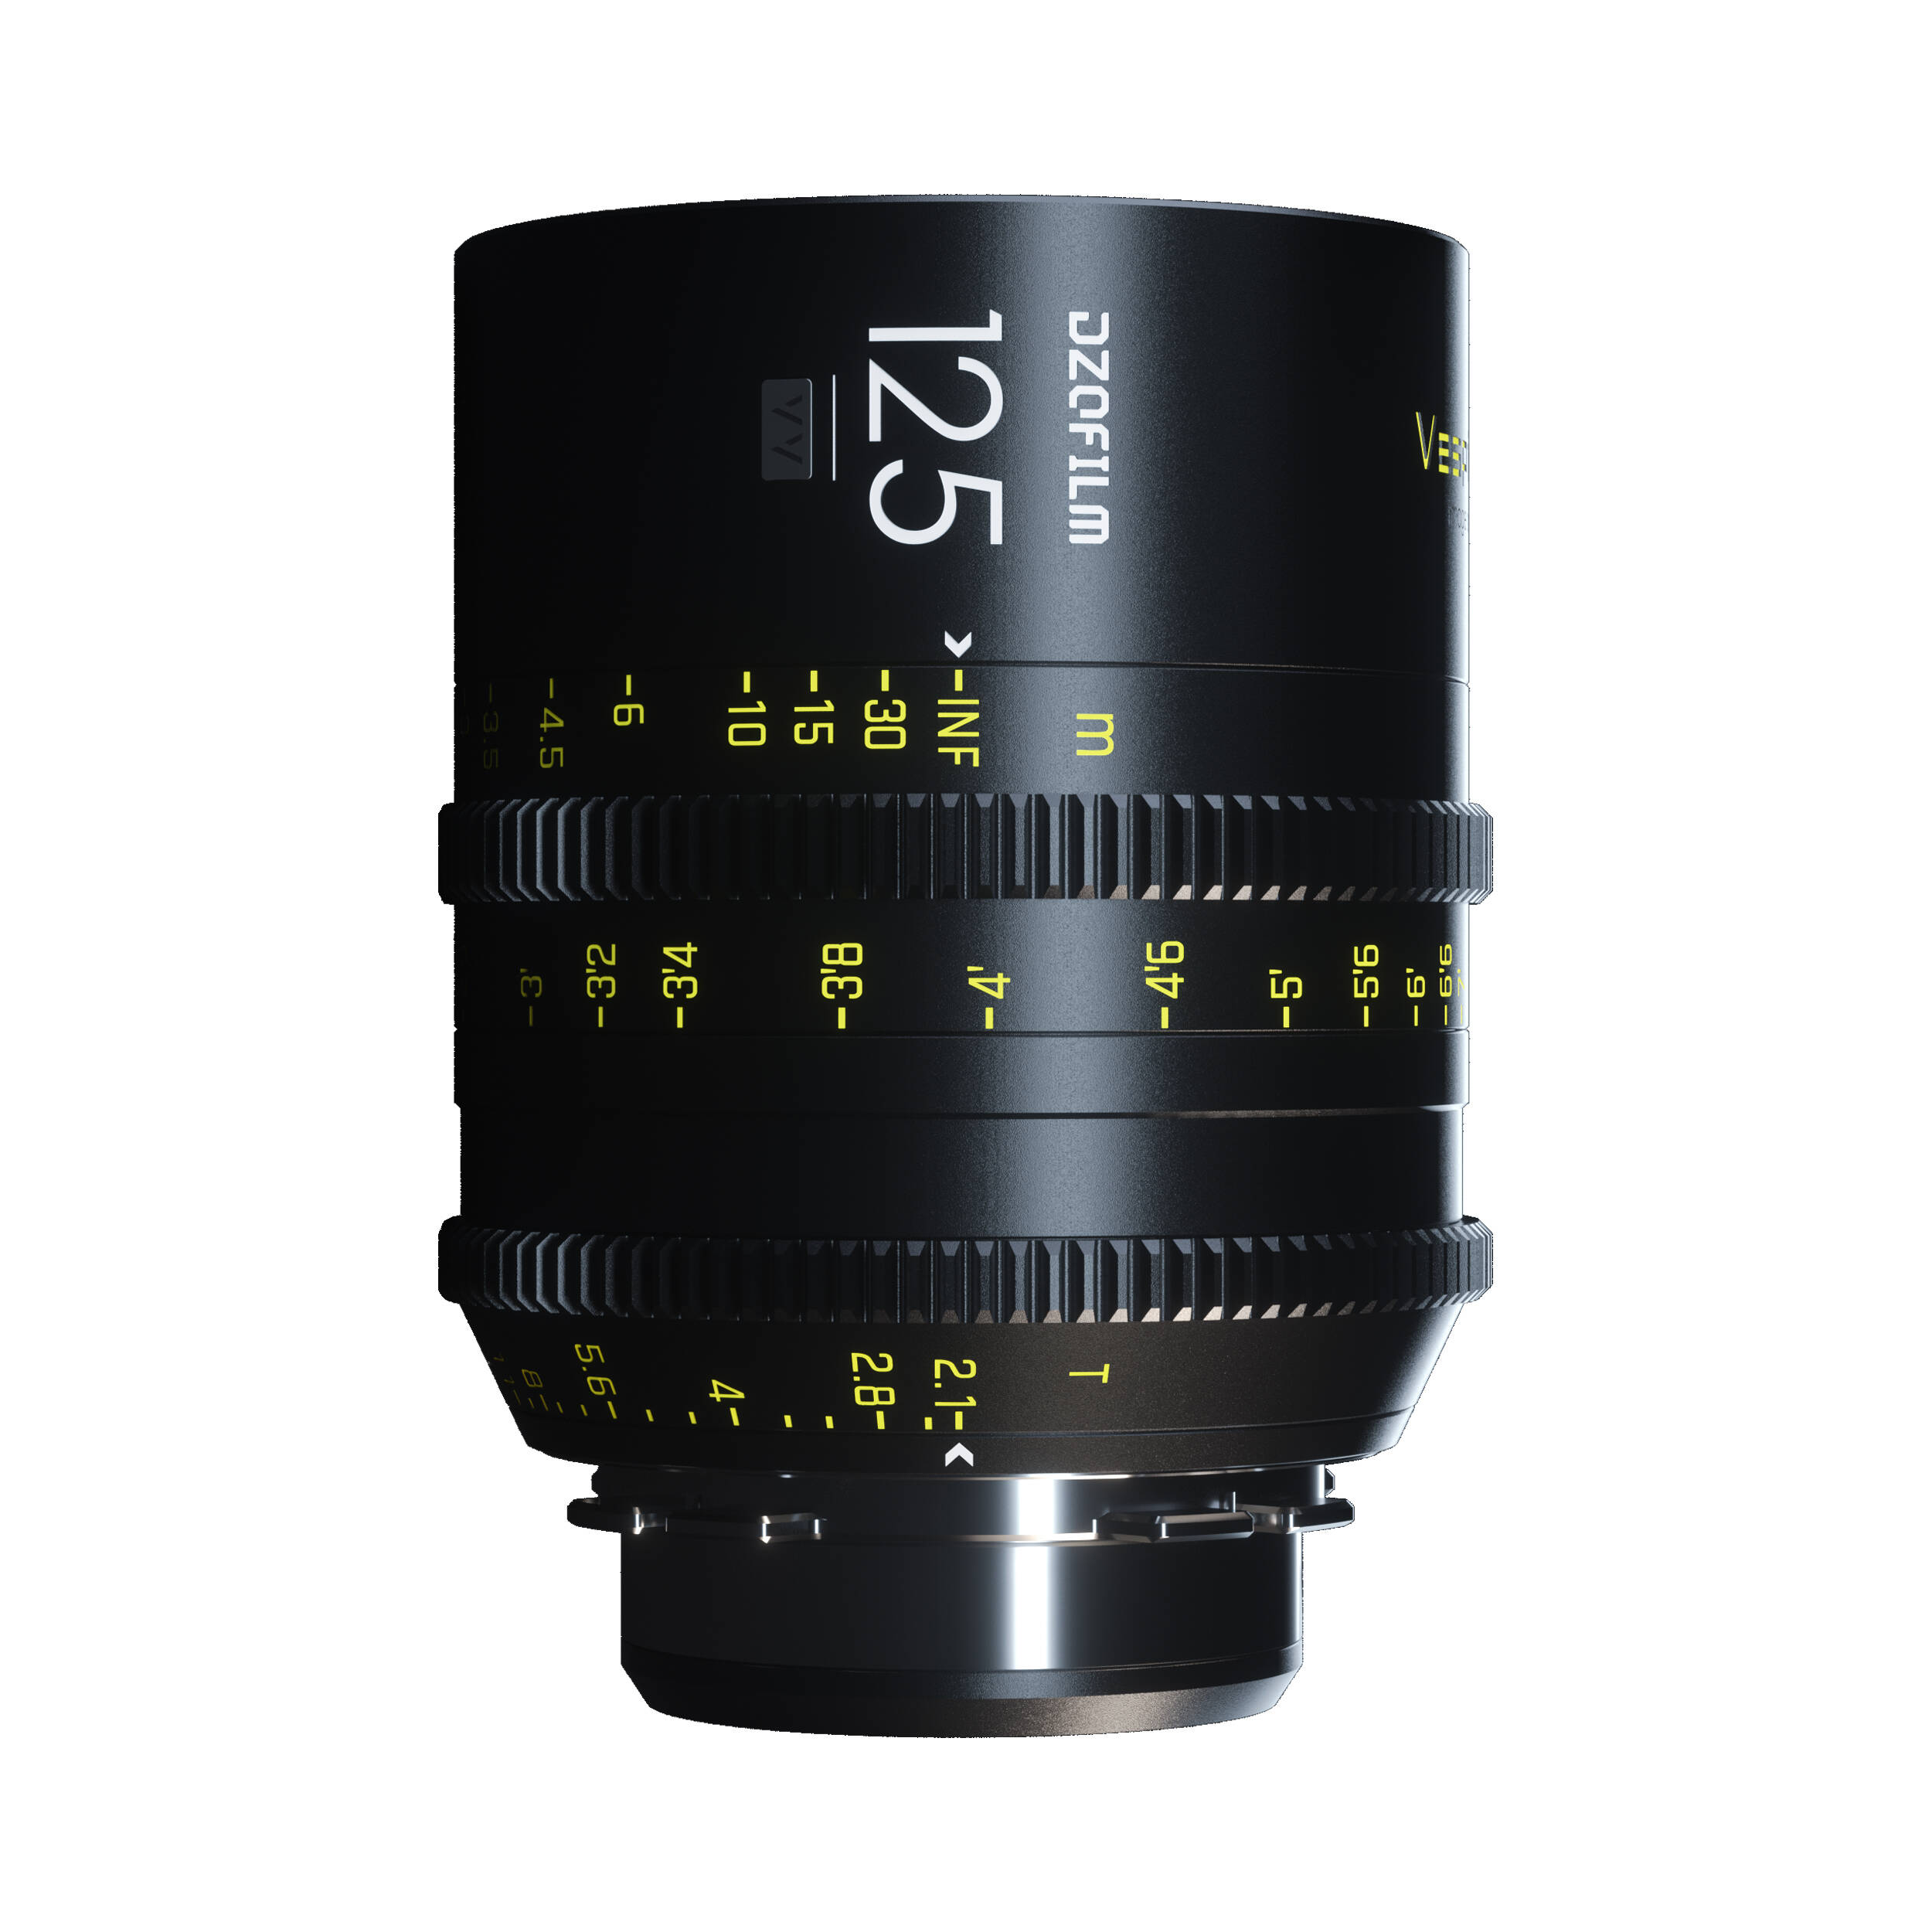 DZOFilm VESPID 125mm T2.1 Lens - PL mount with Canon EF adapter